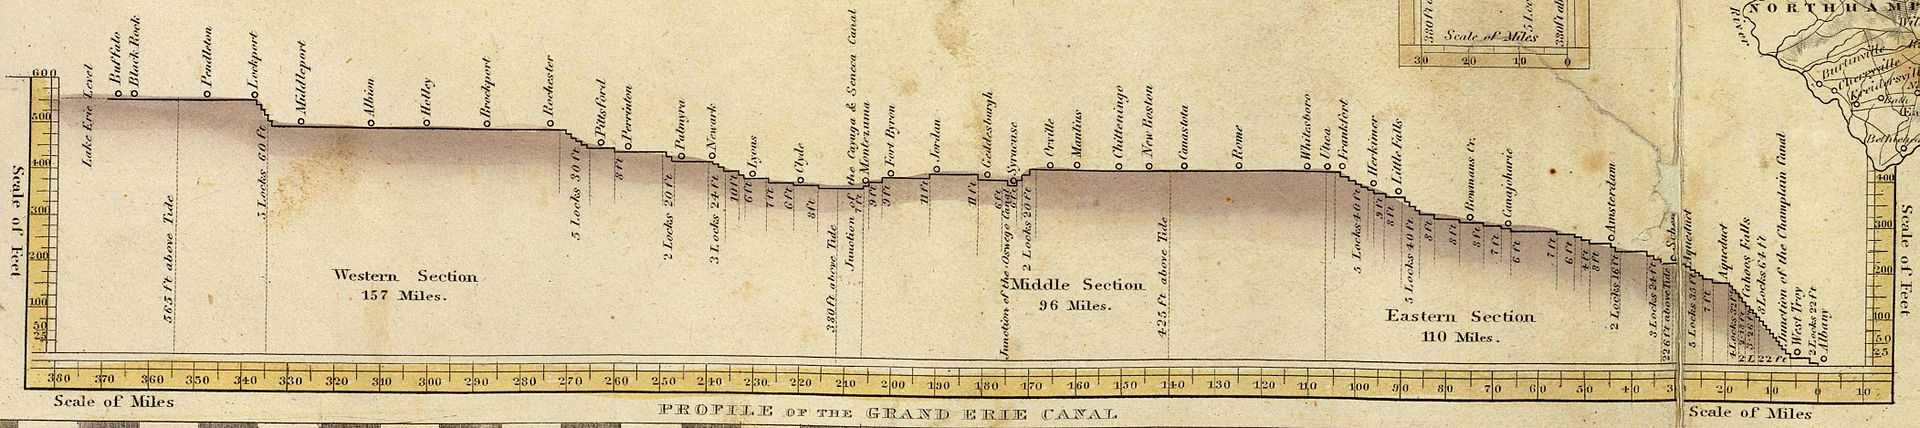 Erie Canal Elevations, 1832